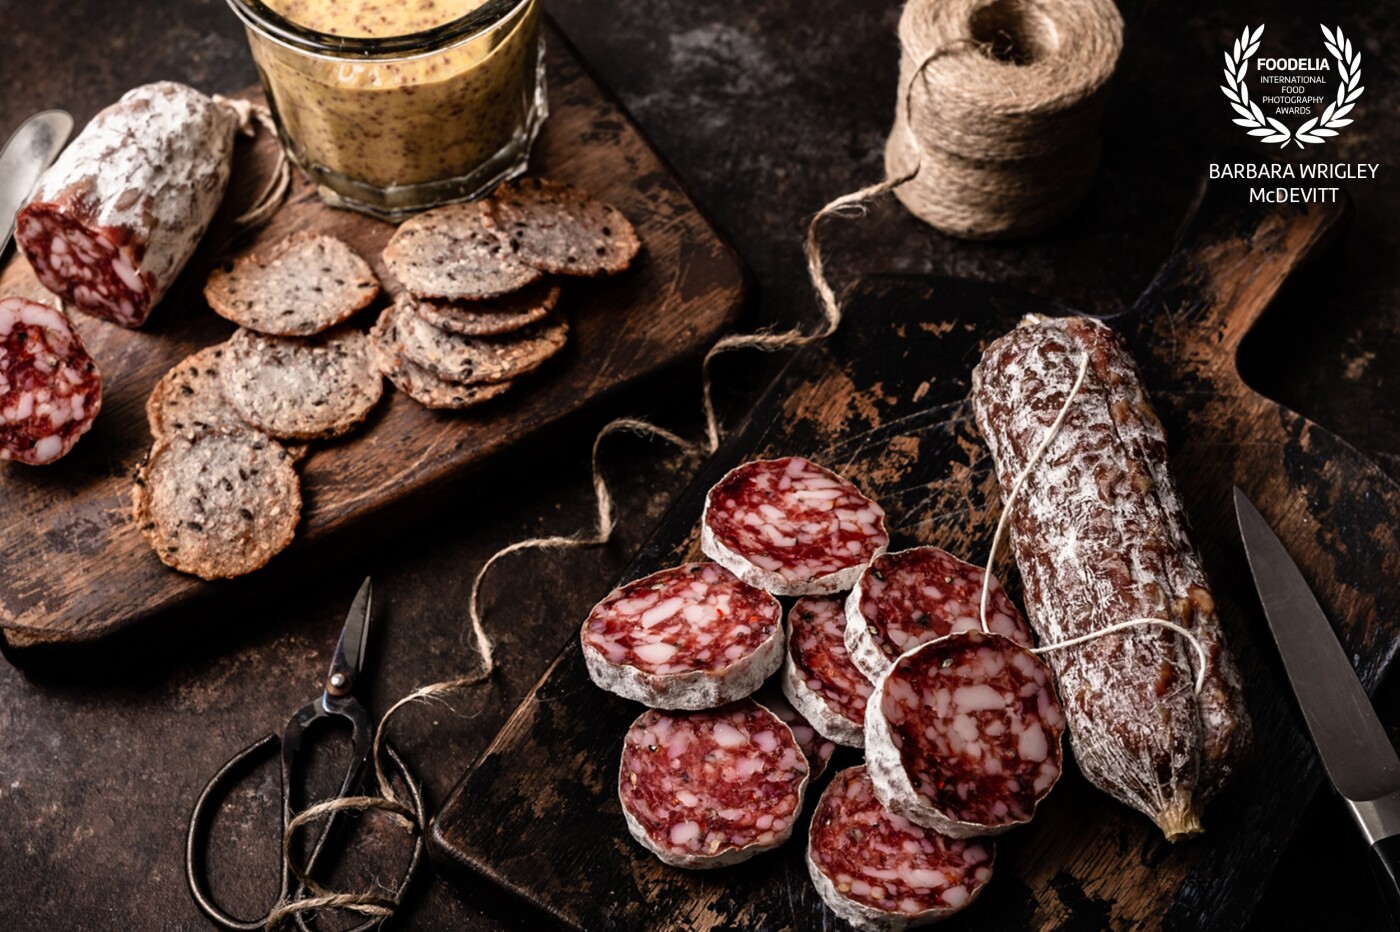 I wanted to showcase a very simple charcuterie that featured only two different Italian cured meats, crackers, olives and some homemade mustard.  Shot with a Nikon D850 and a Profoto B10.